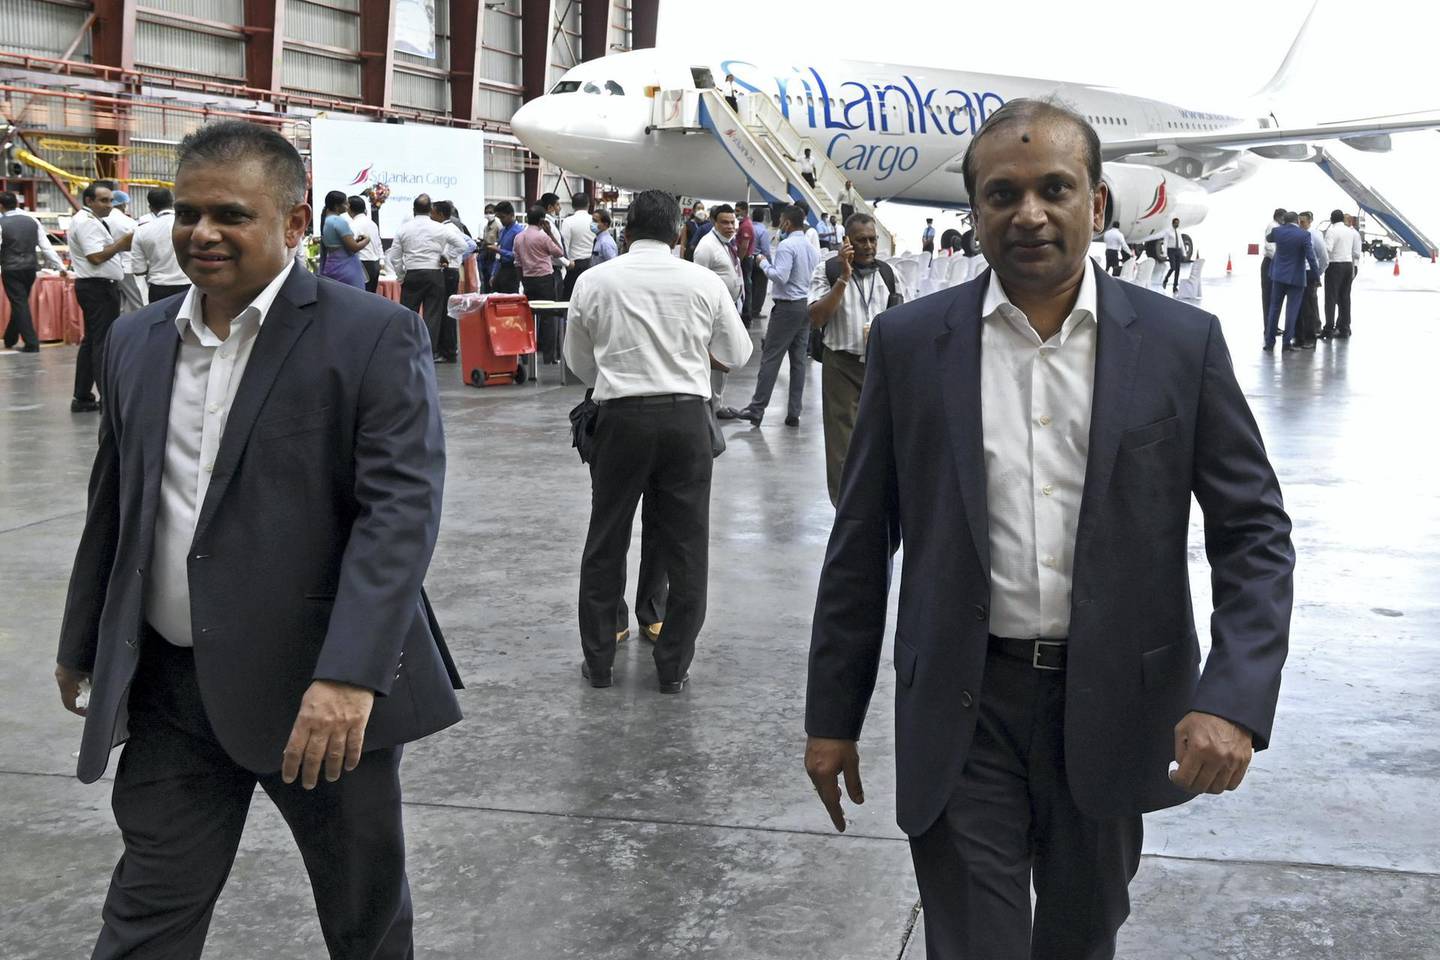 Ashok Pathirage (R) Chairman of Sri Lanka's national carrier Sri Lankan Airlines and its Chief Executive Officer Vipula Gunatilleka walk during the launch ceremony of Airbus A330 passenger aircraft converted as a cargo carrier at Bandaranaike International airport in Katunayaka, near Colombo on June 25, 2020. - The airline said its technical crew carried out the modifications to allow the aircraft  to carry up to 45 tonnes of cargo both in the former passenger deck and the cargo hold at a time when demand for air cargo space has risen while passenger traffic has plummeted due to the coronavirus pandemic. (Photo by ISHARA S. KODIKARA / AFP)